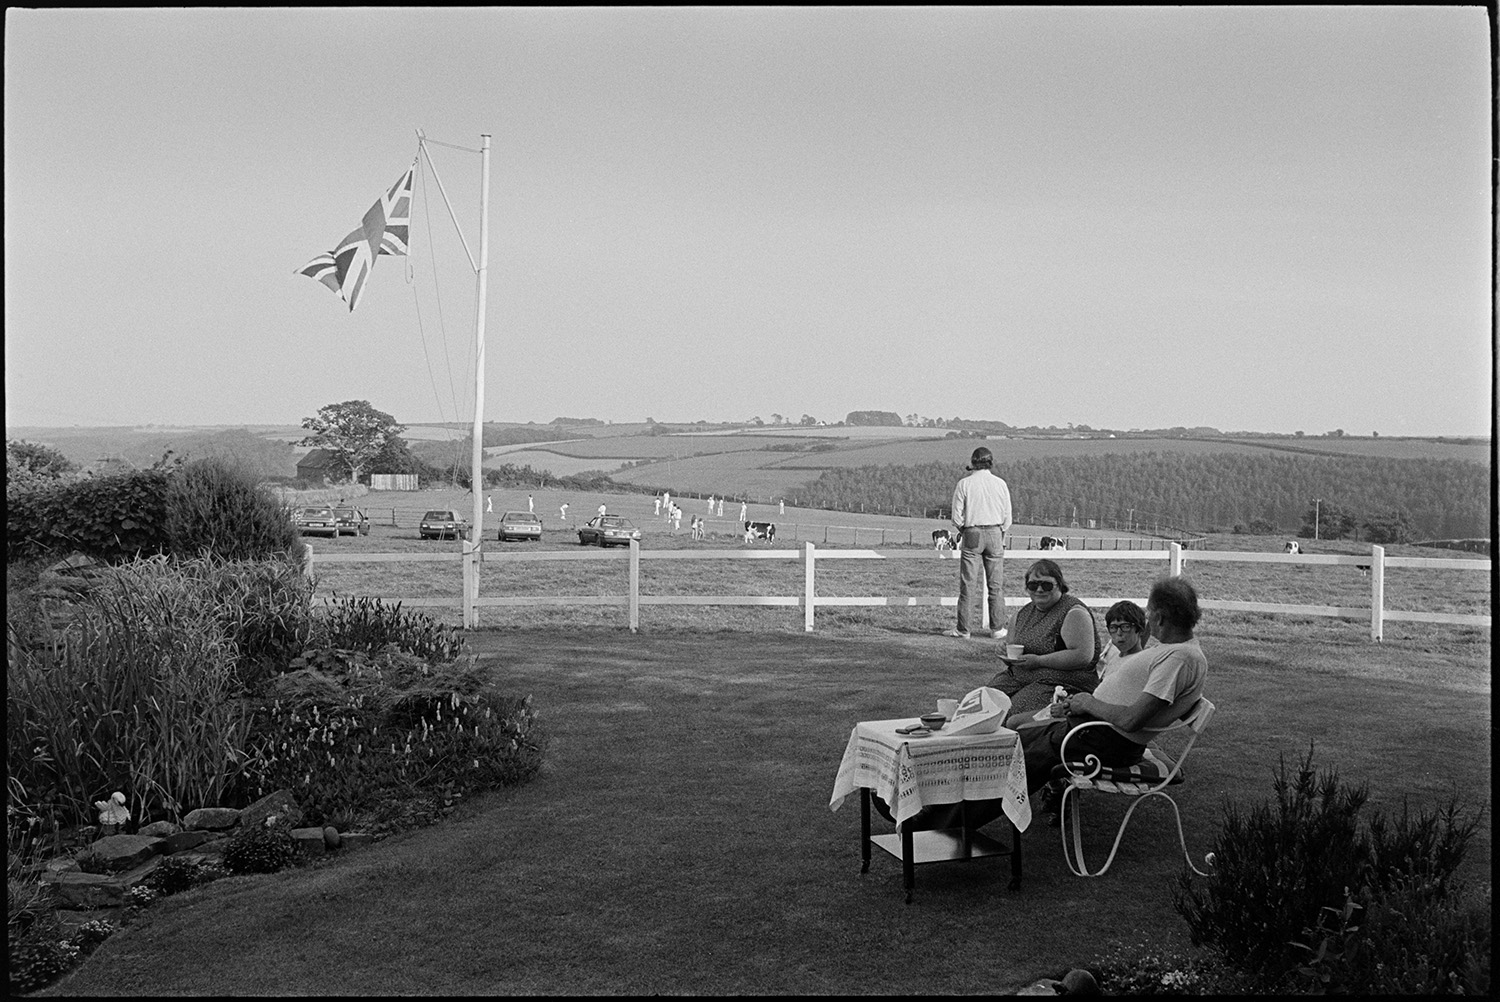 Garden fete, people having tea, cake stall. 
[Three people sat on a bench drinking tea and eating cakes at a fete at Cricket Close, Chulmleigh. A Union Jack flag is flying from a flagpole. In the background a man is stood looking over a wooden fence at a view of cows grazing and men playing cricket.]